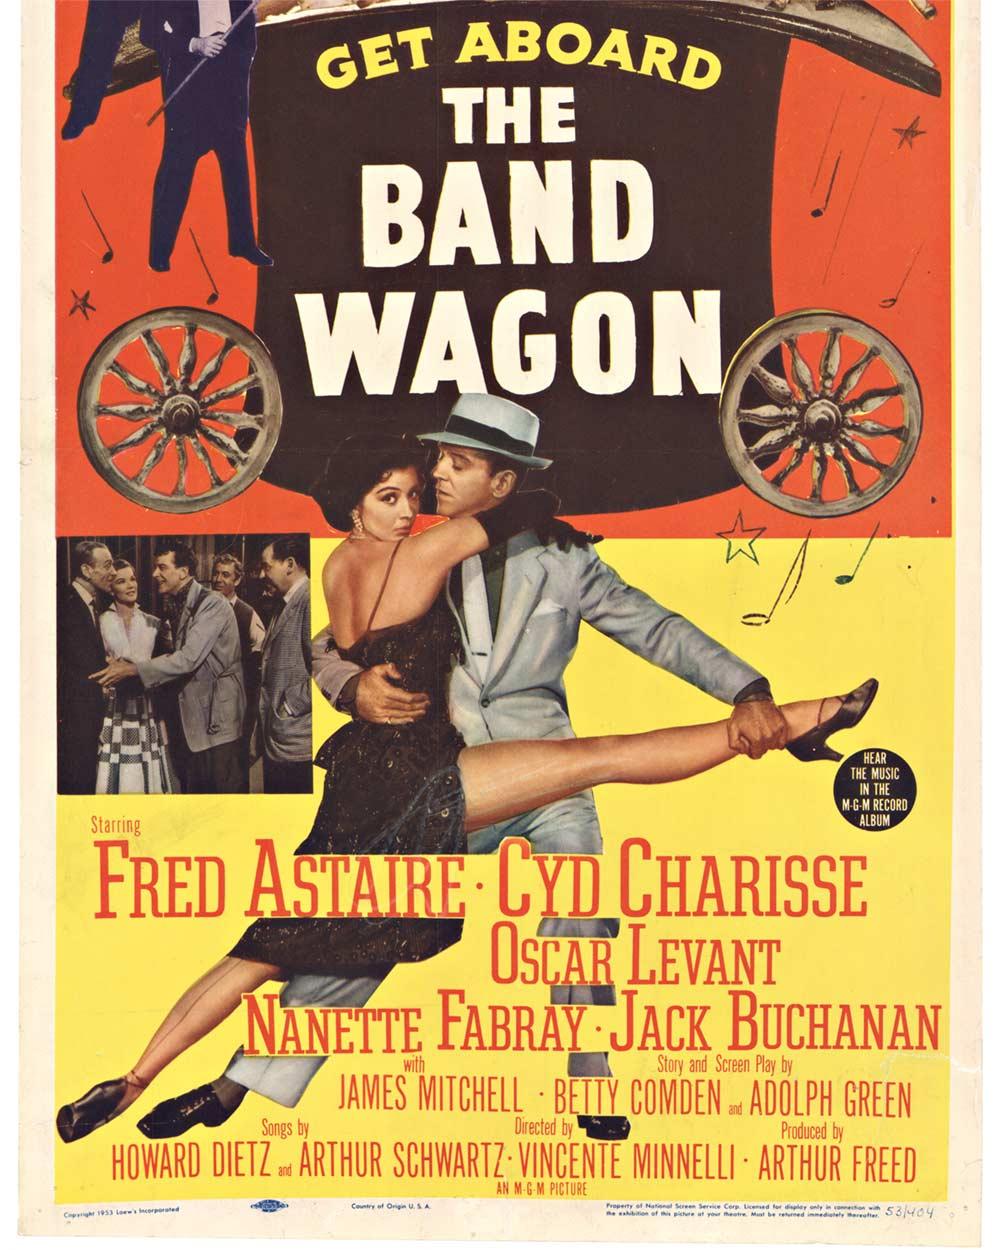 Original 'The Band Wagon' vintage movie poster insert, 1953 - Print by Unknown